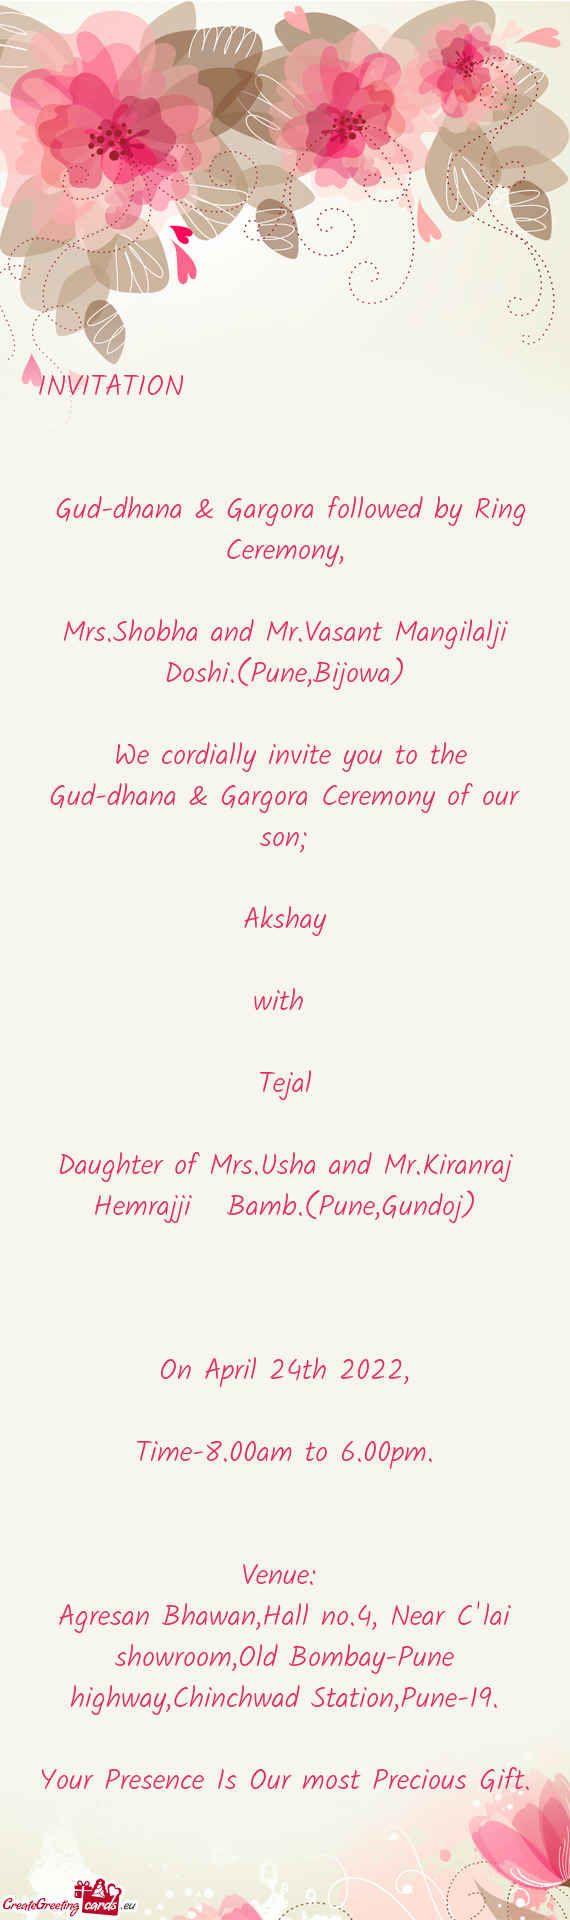 We cordially invite you to the Gud-dhana & Gargora Ceremony of our son;